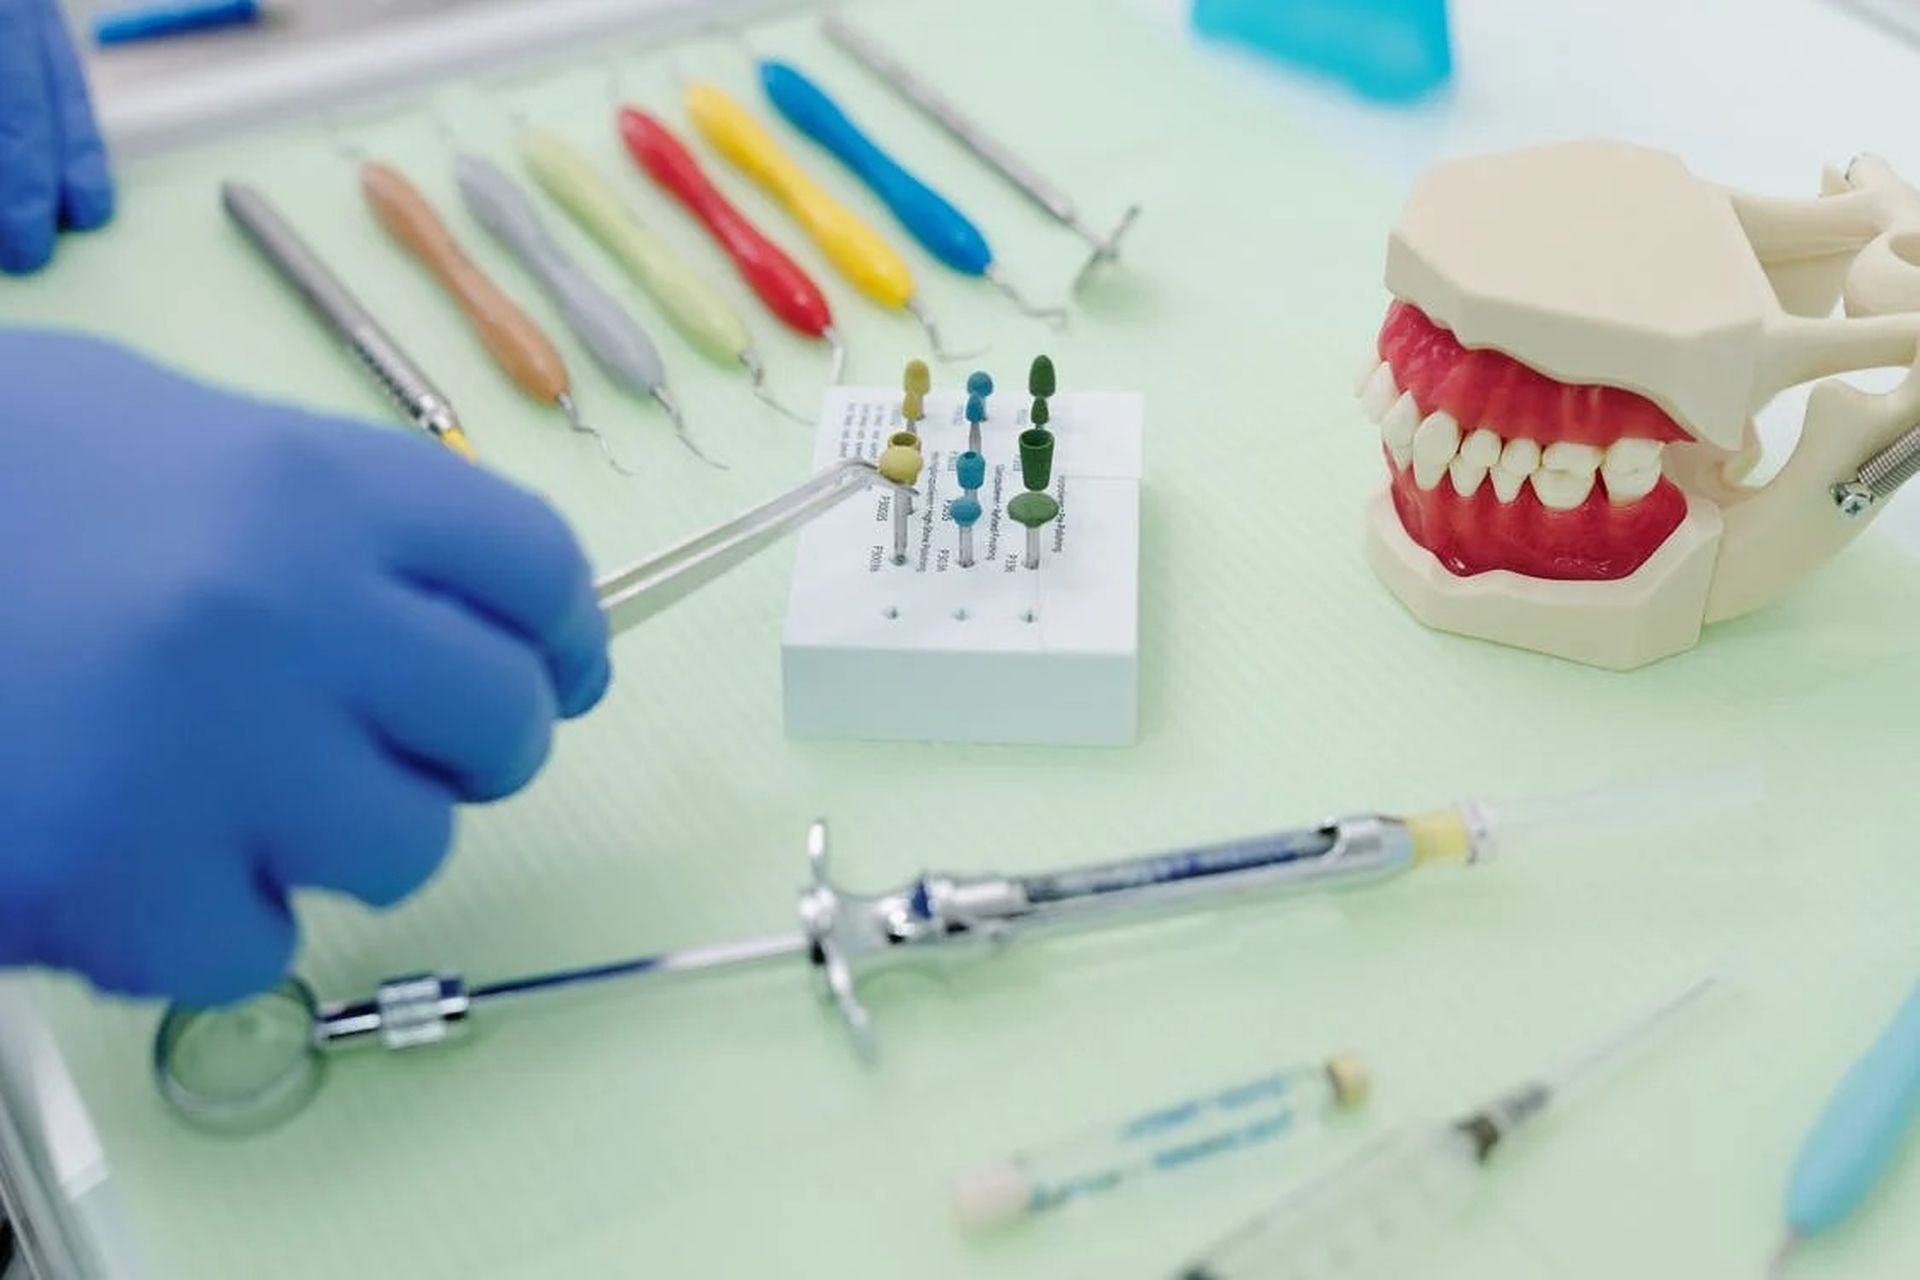 Overjet dental AI program's aim is to remove the guesswork out of the diagnosis process so every professional can offer the right treatment to their patients.